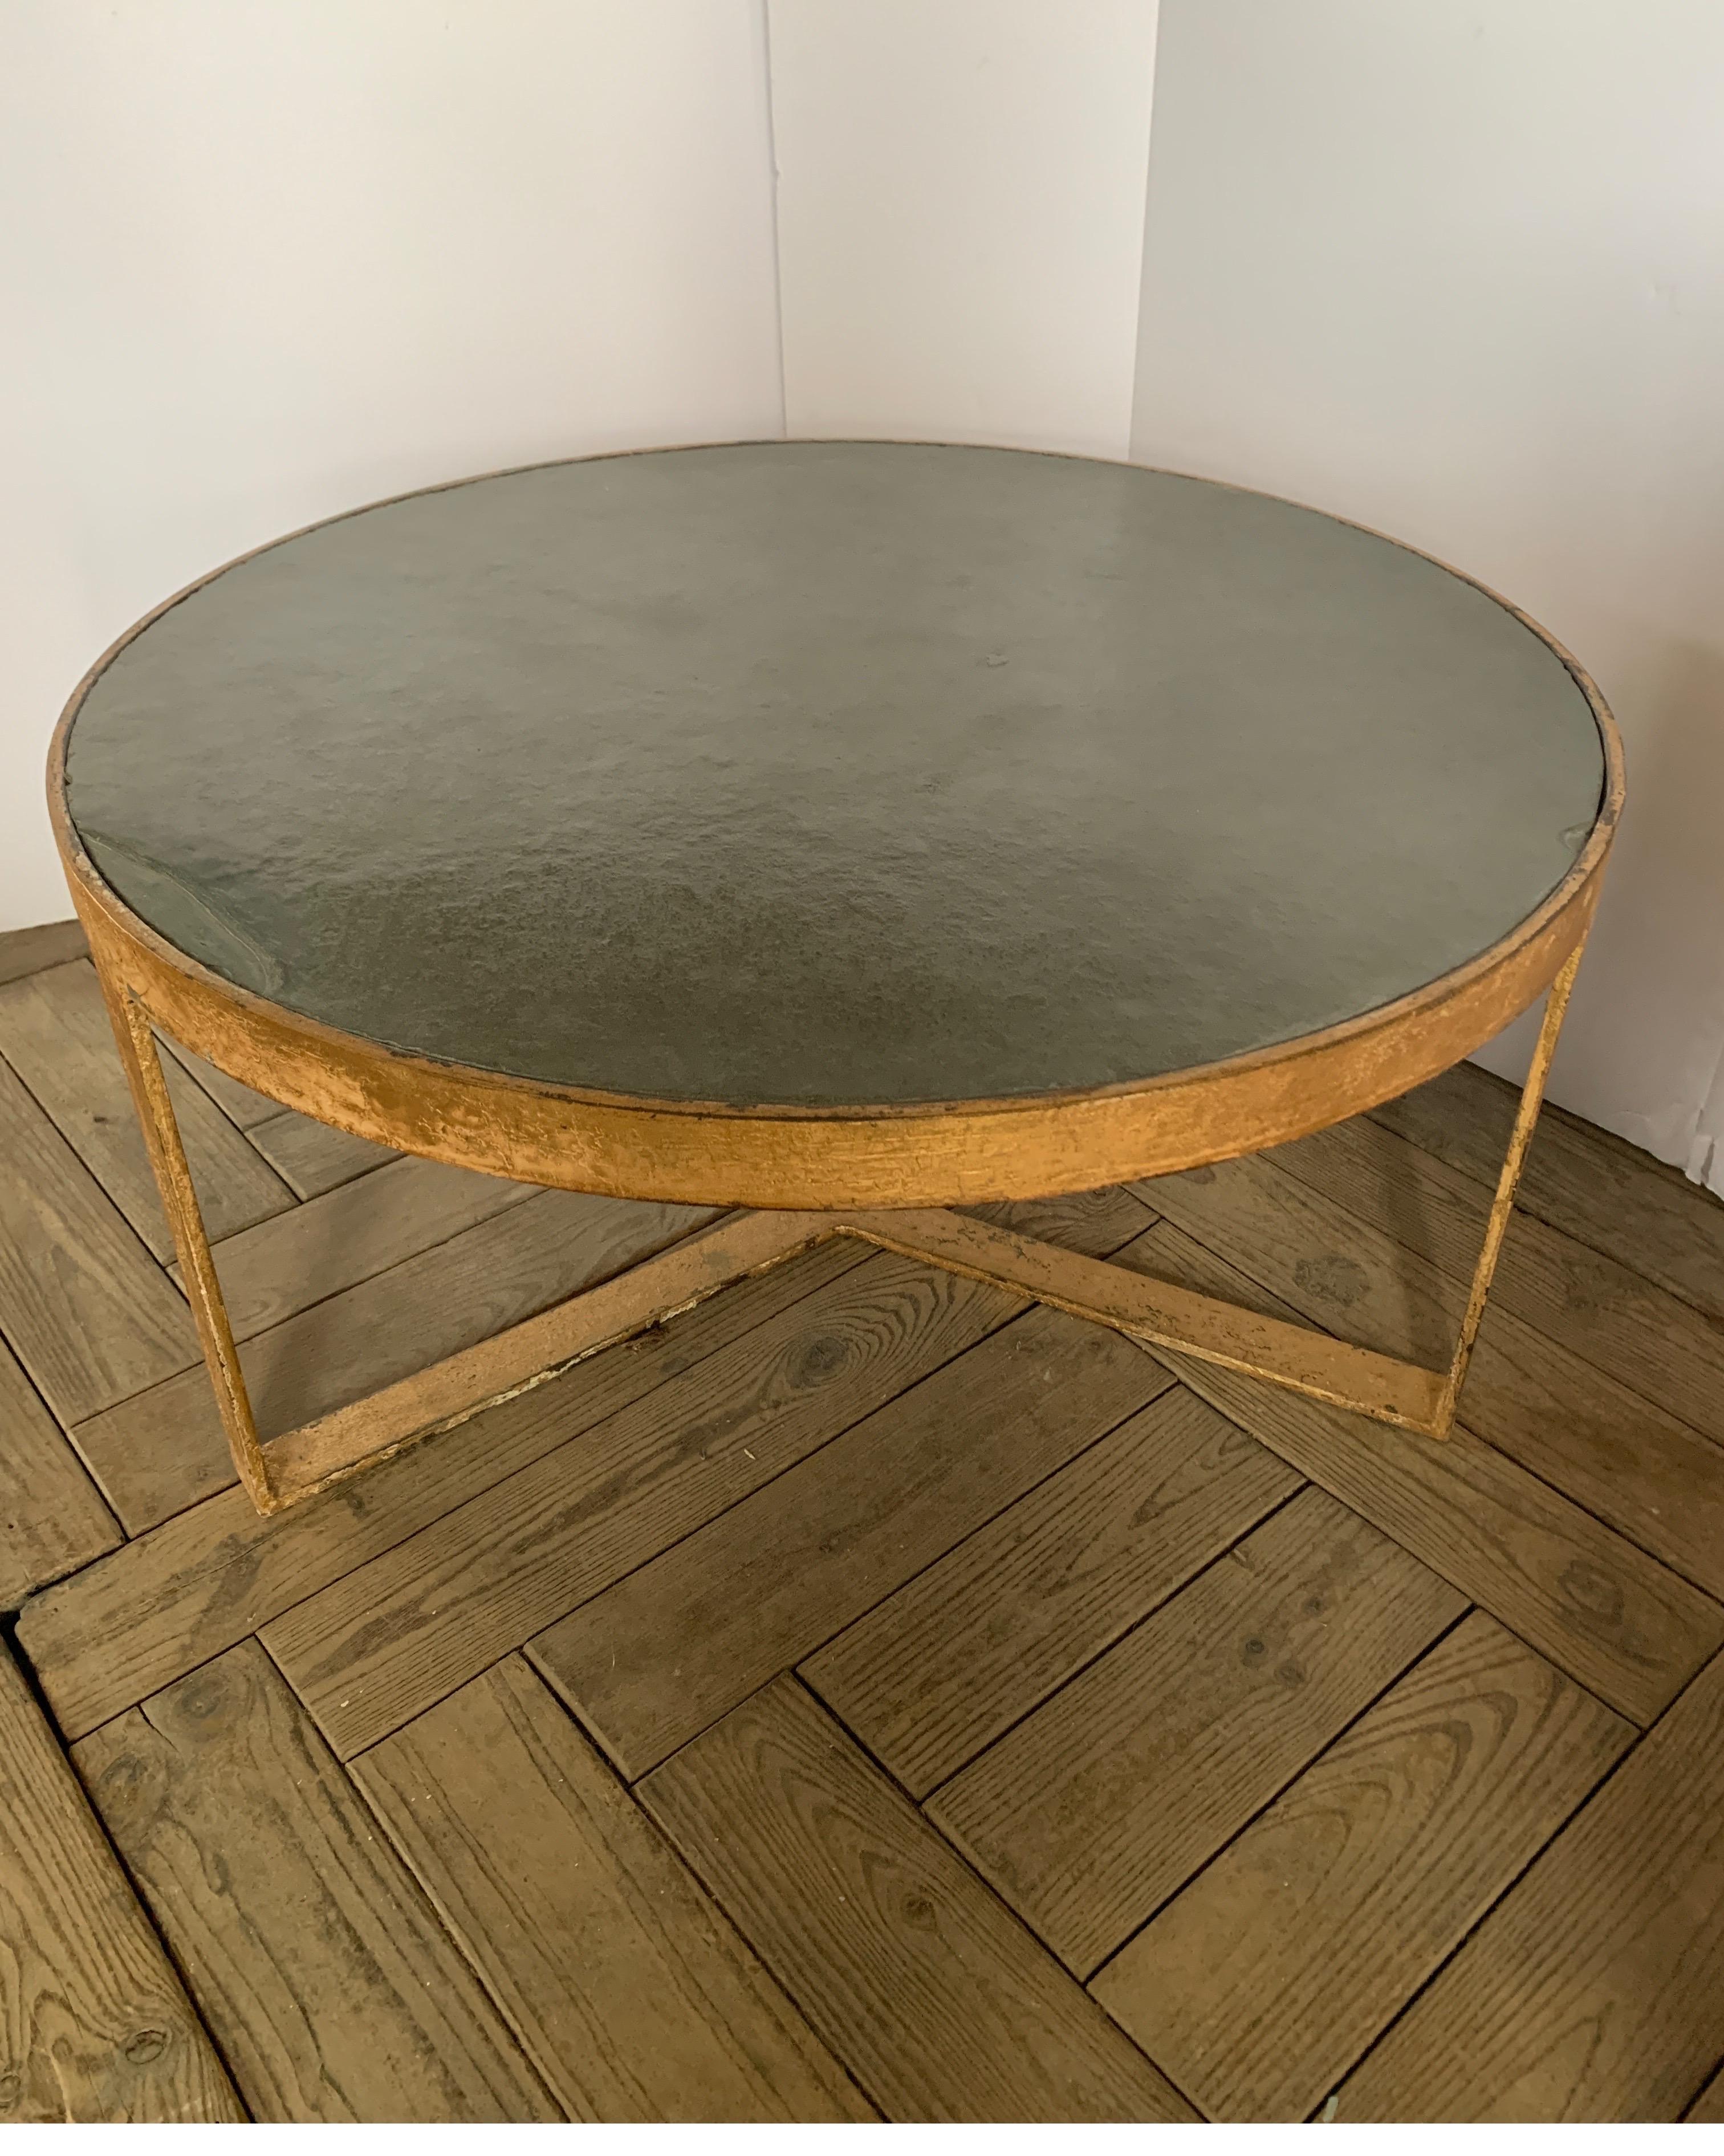 This is a heavy duty coffee table with gold finish and greenish gray slate top. We make them in our warehouse in Europe. They have a distressed look as if they have age both the gold finish as well as the slate.